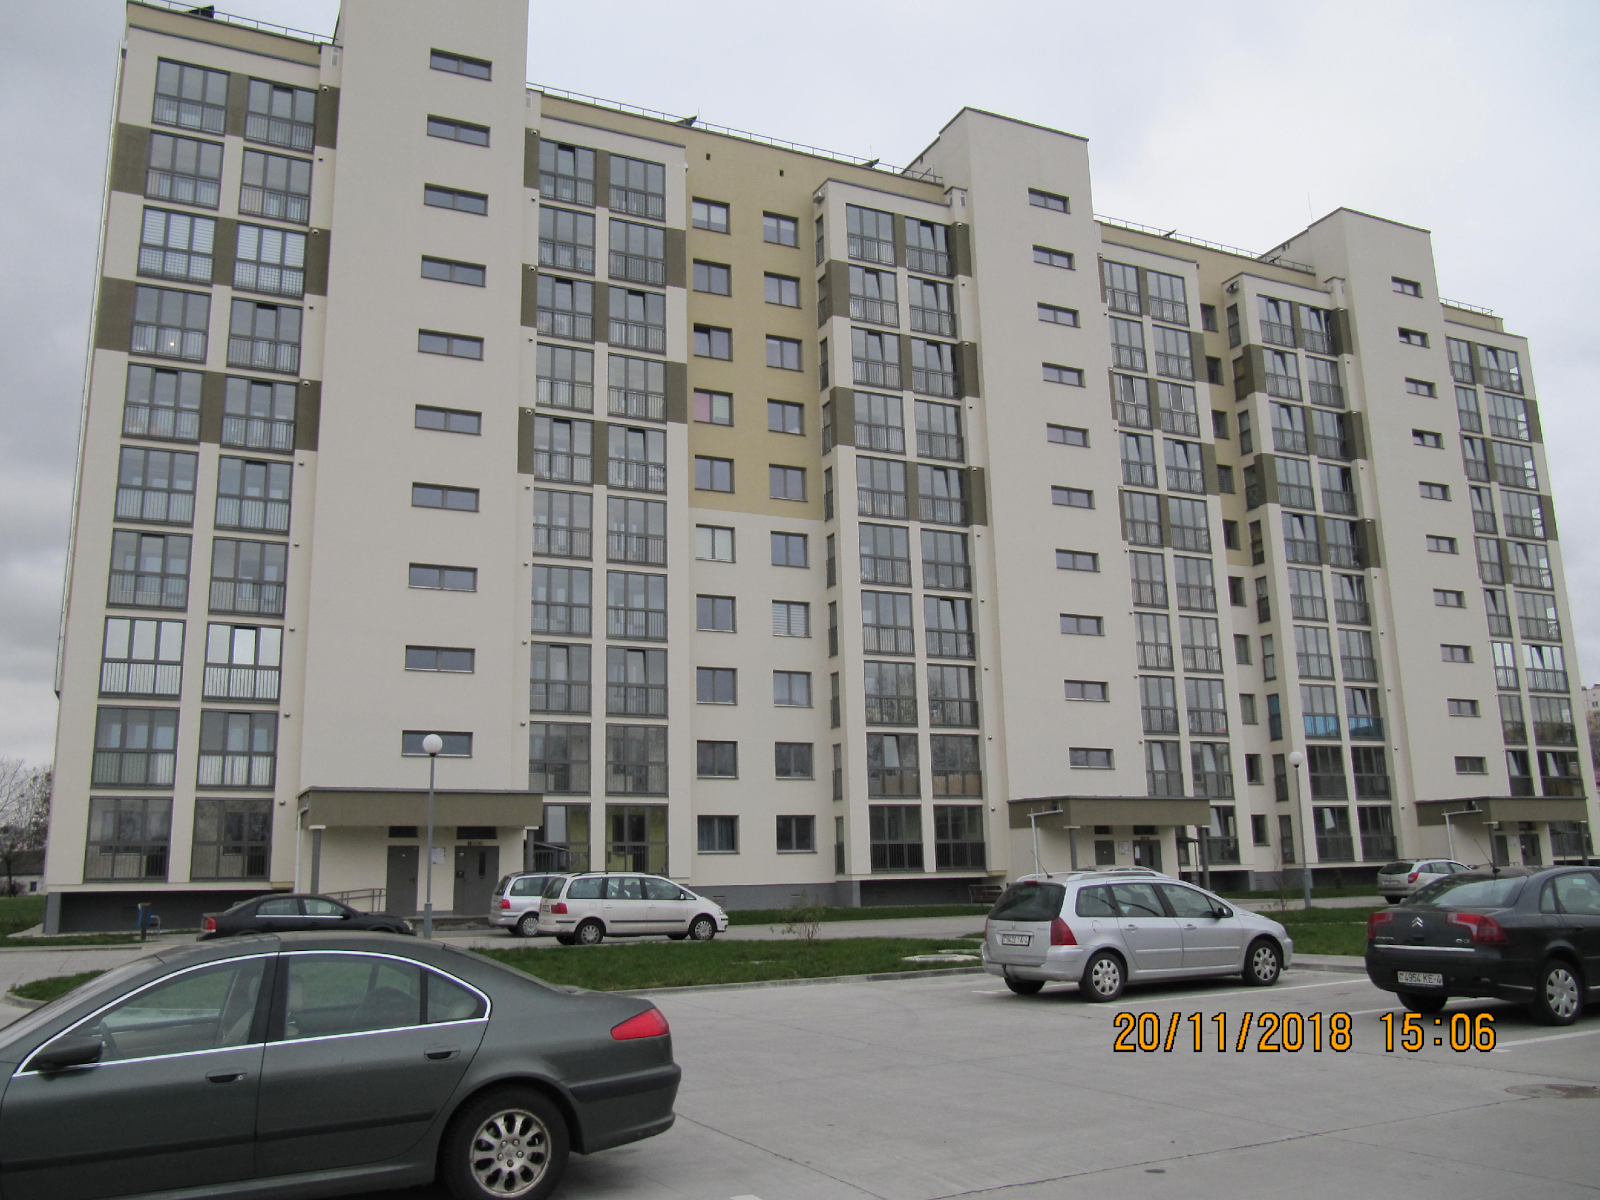 120-apartment, 10-storey energy efficient residential building. Grodno